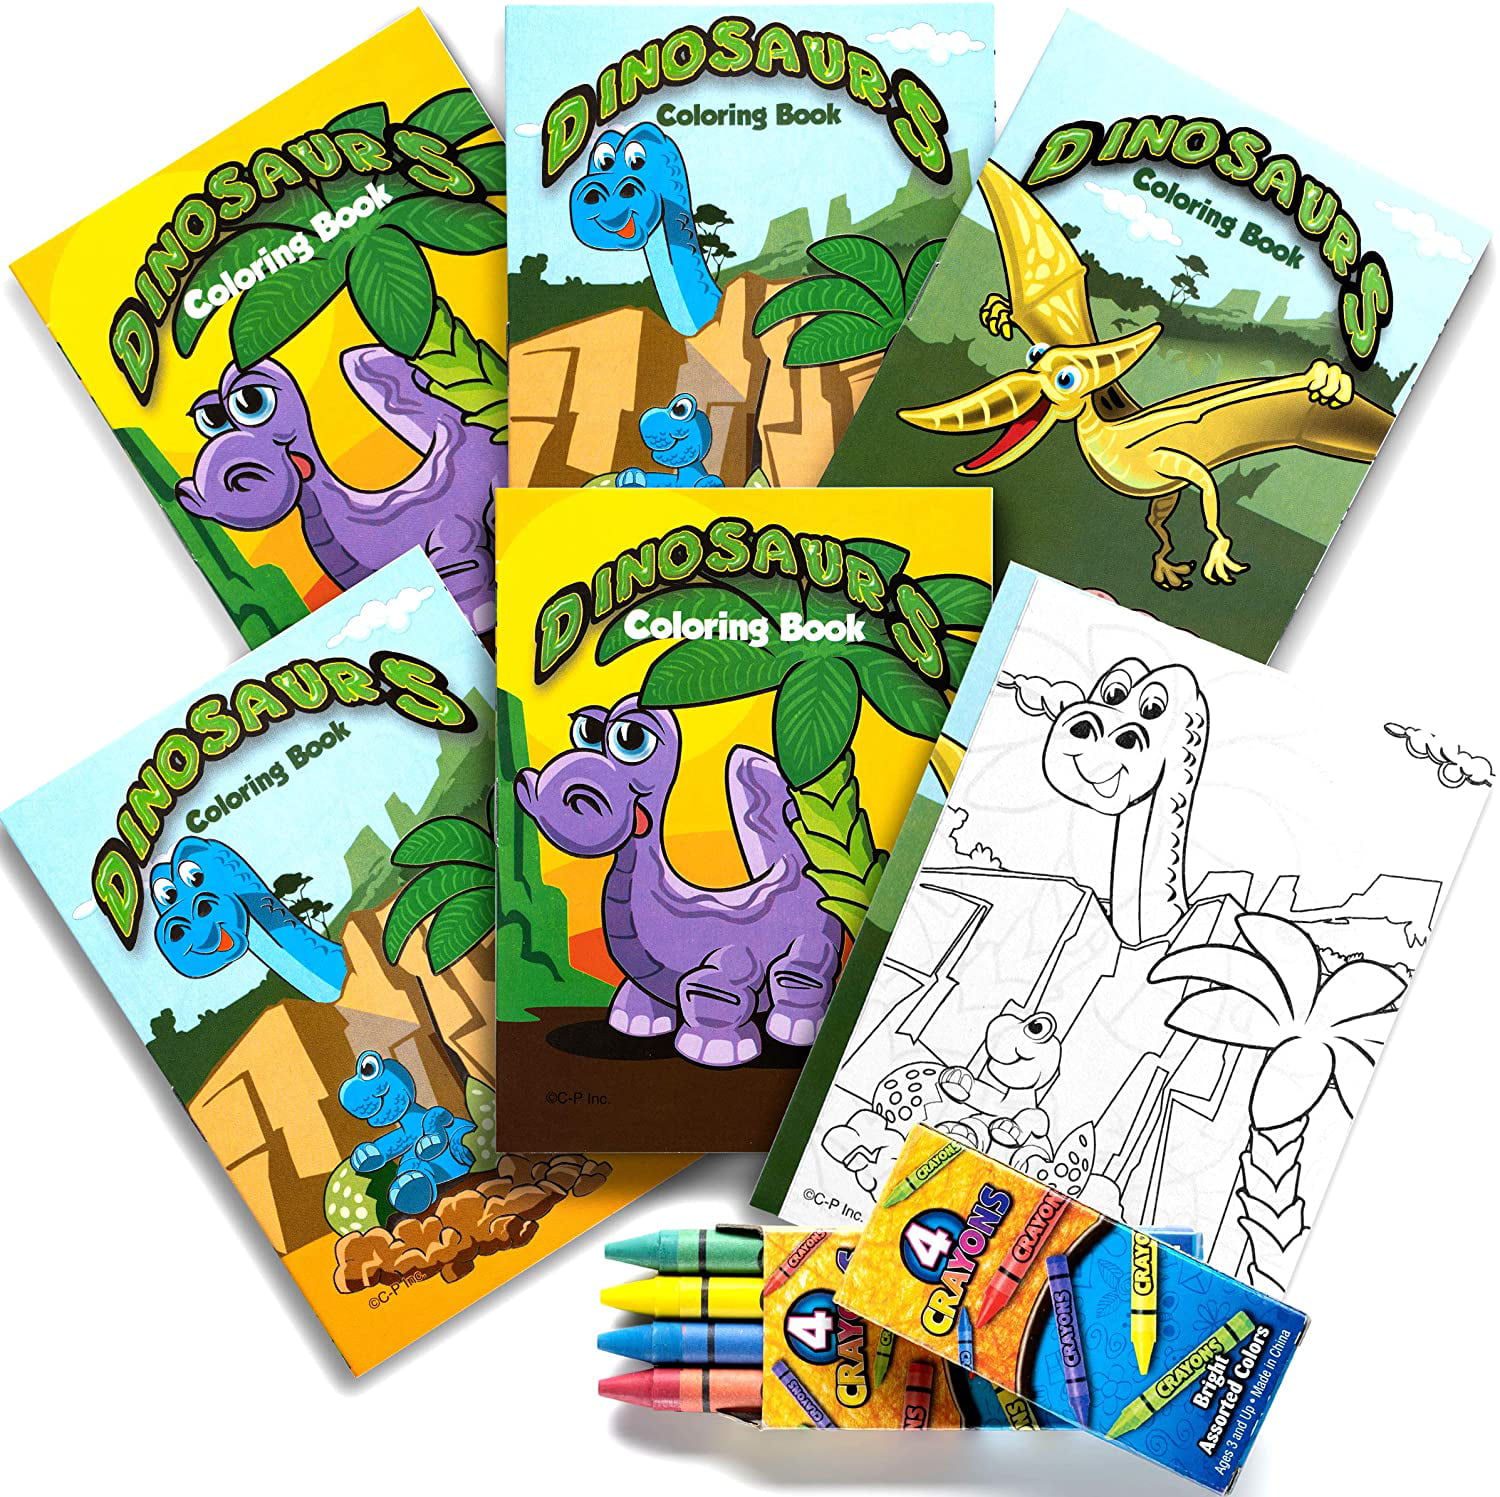 Bulk Mini Dinosaur Coloring Books Pack Of 24 For Birthday Party,Dinosaur Themed Goody Bag Filler Dino Designs Coloring Books And Crayons With 8 Premium Color Crayons